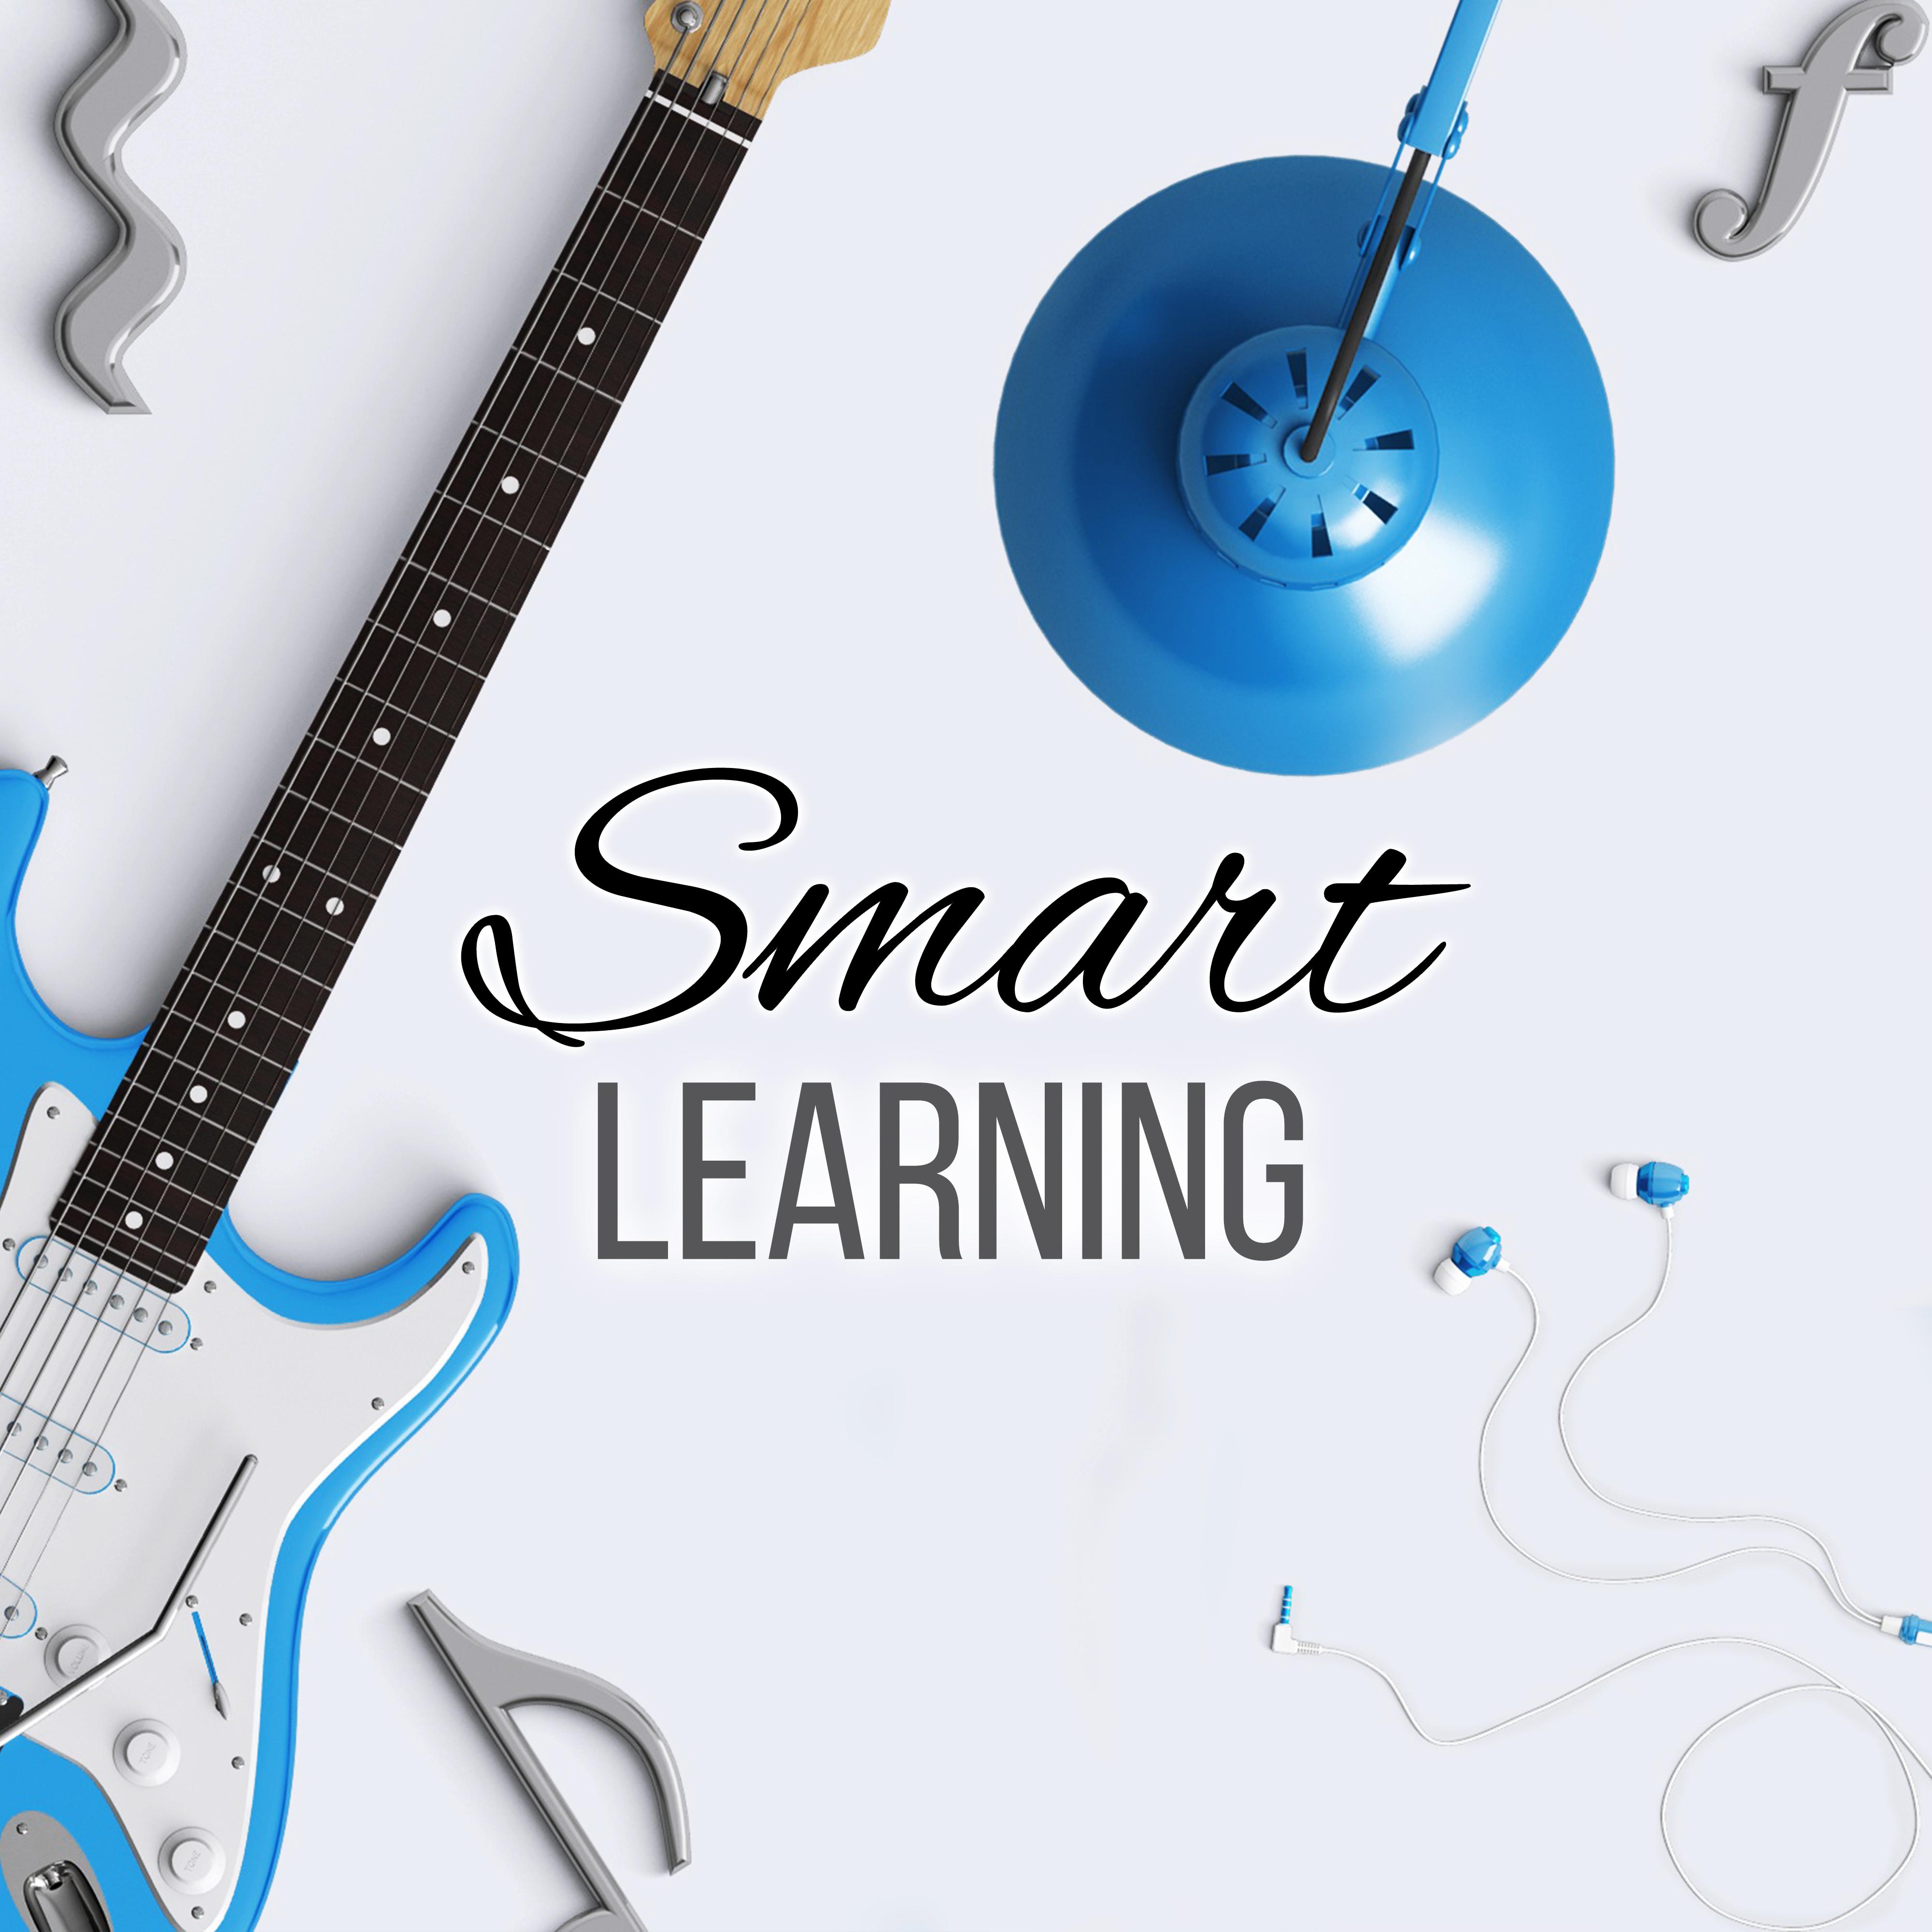 Smart Learning - Relaxing Music for Reading, Piano & Flute Sounds to Increase Brain Power